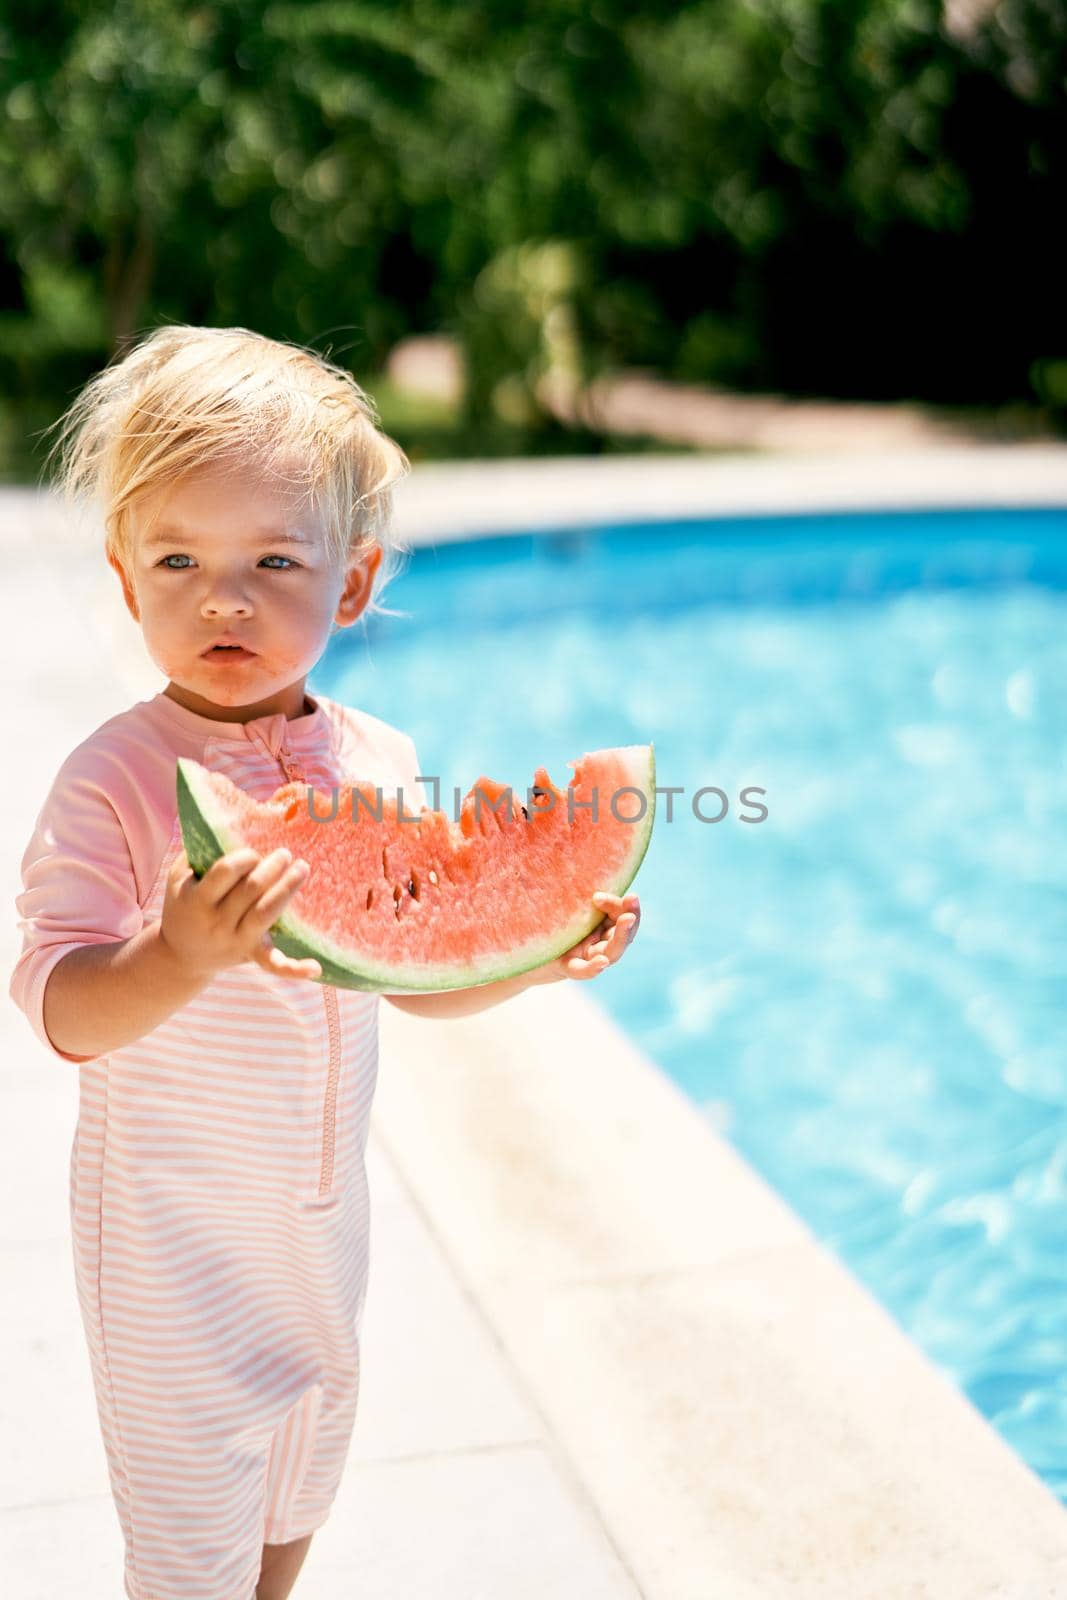 Little girl with a piece of a watermelon near the pool with turquoise water by Nadtochiy